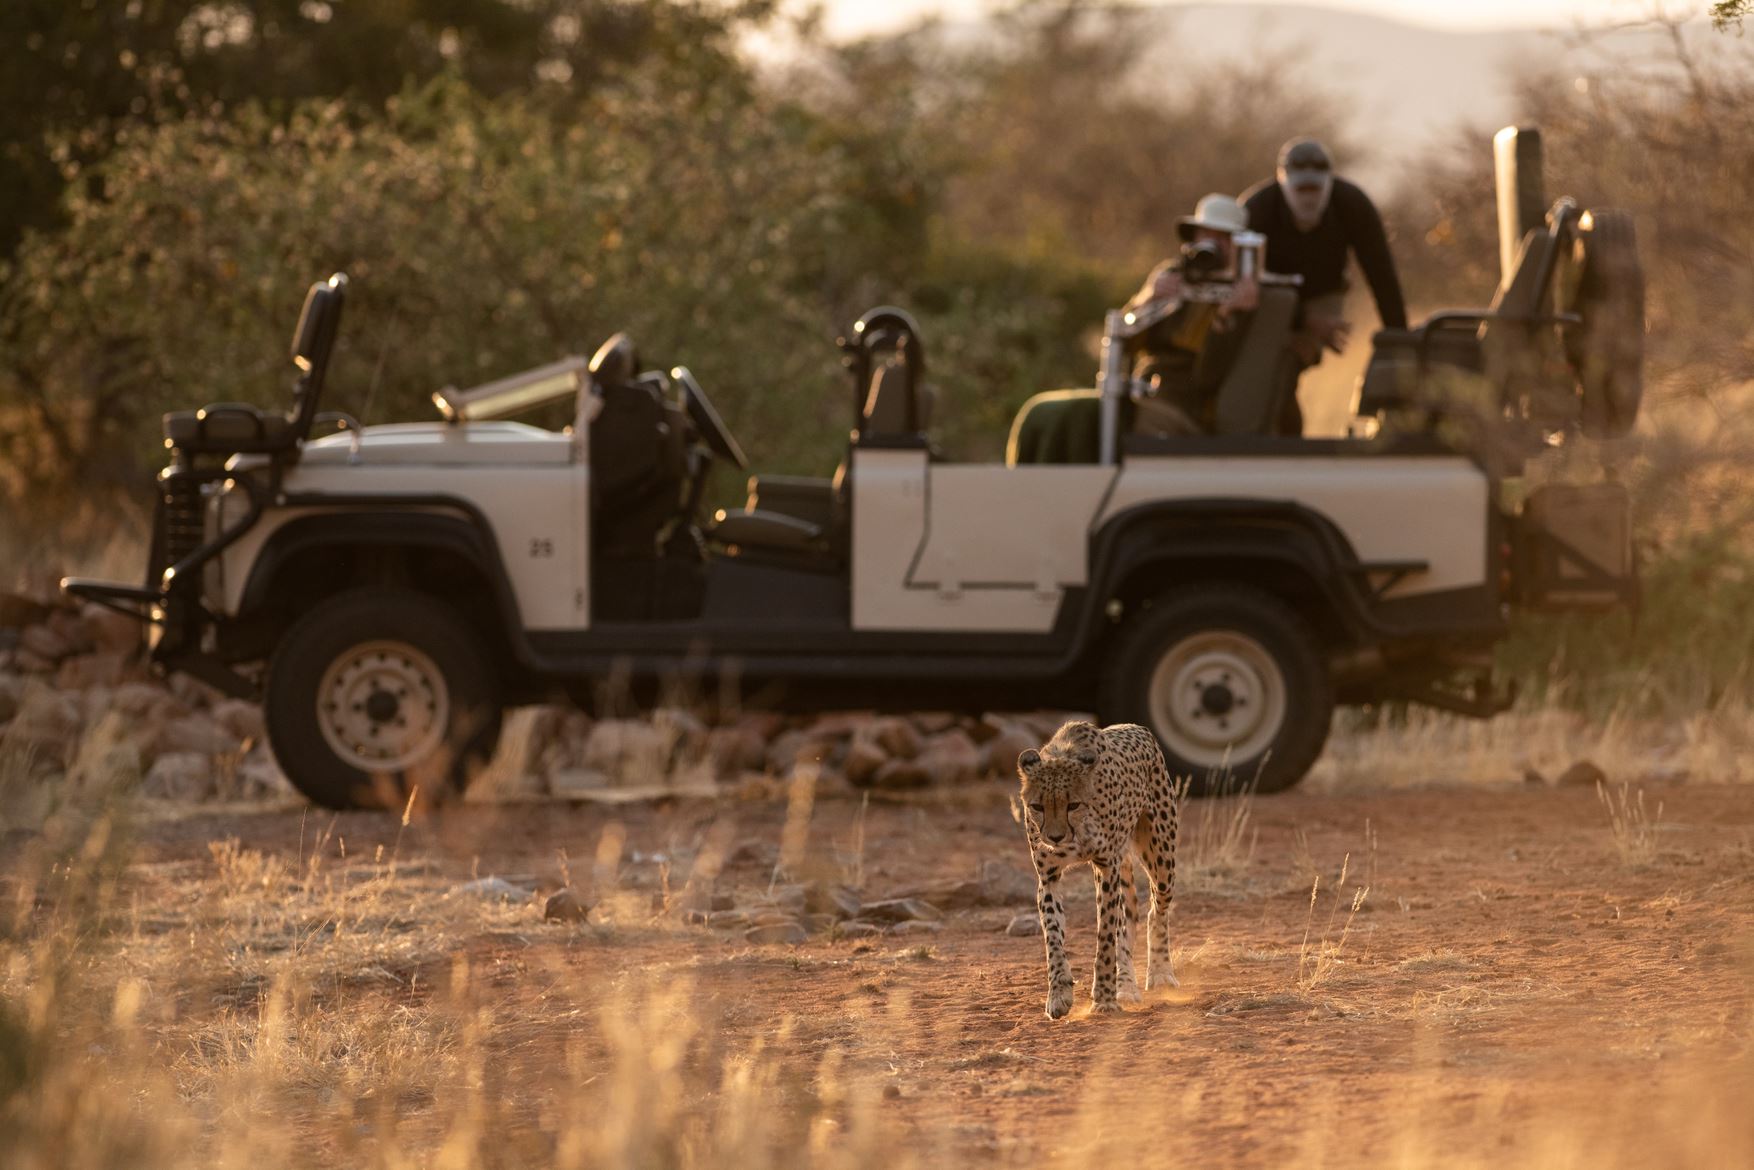 Tswalu Introduces Photographic Safaris with Specialist Guide